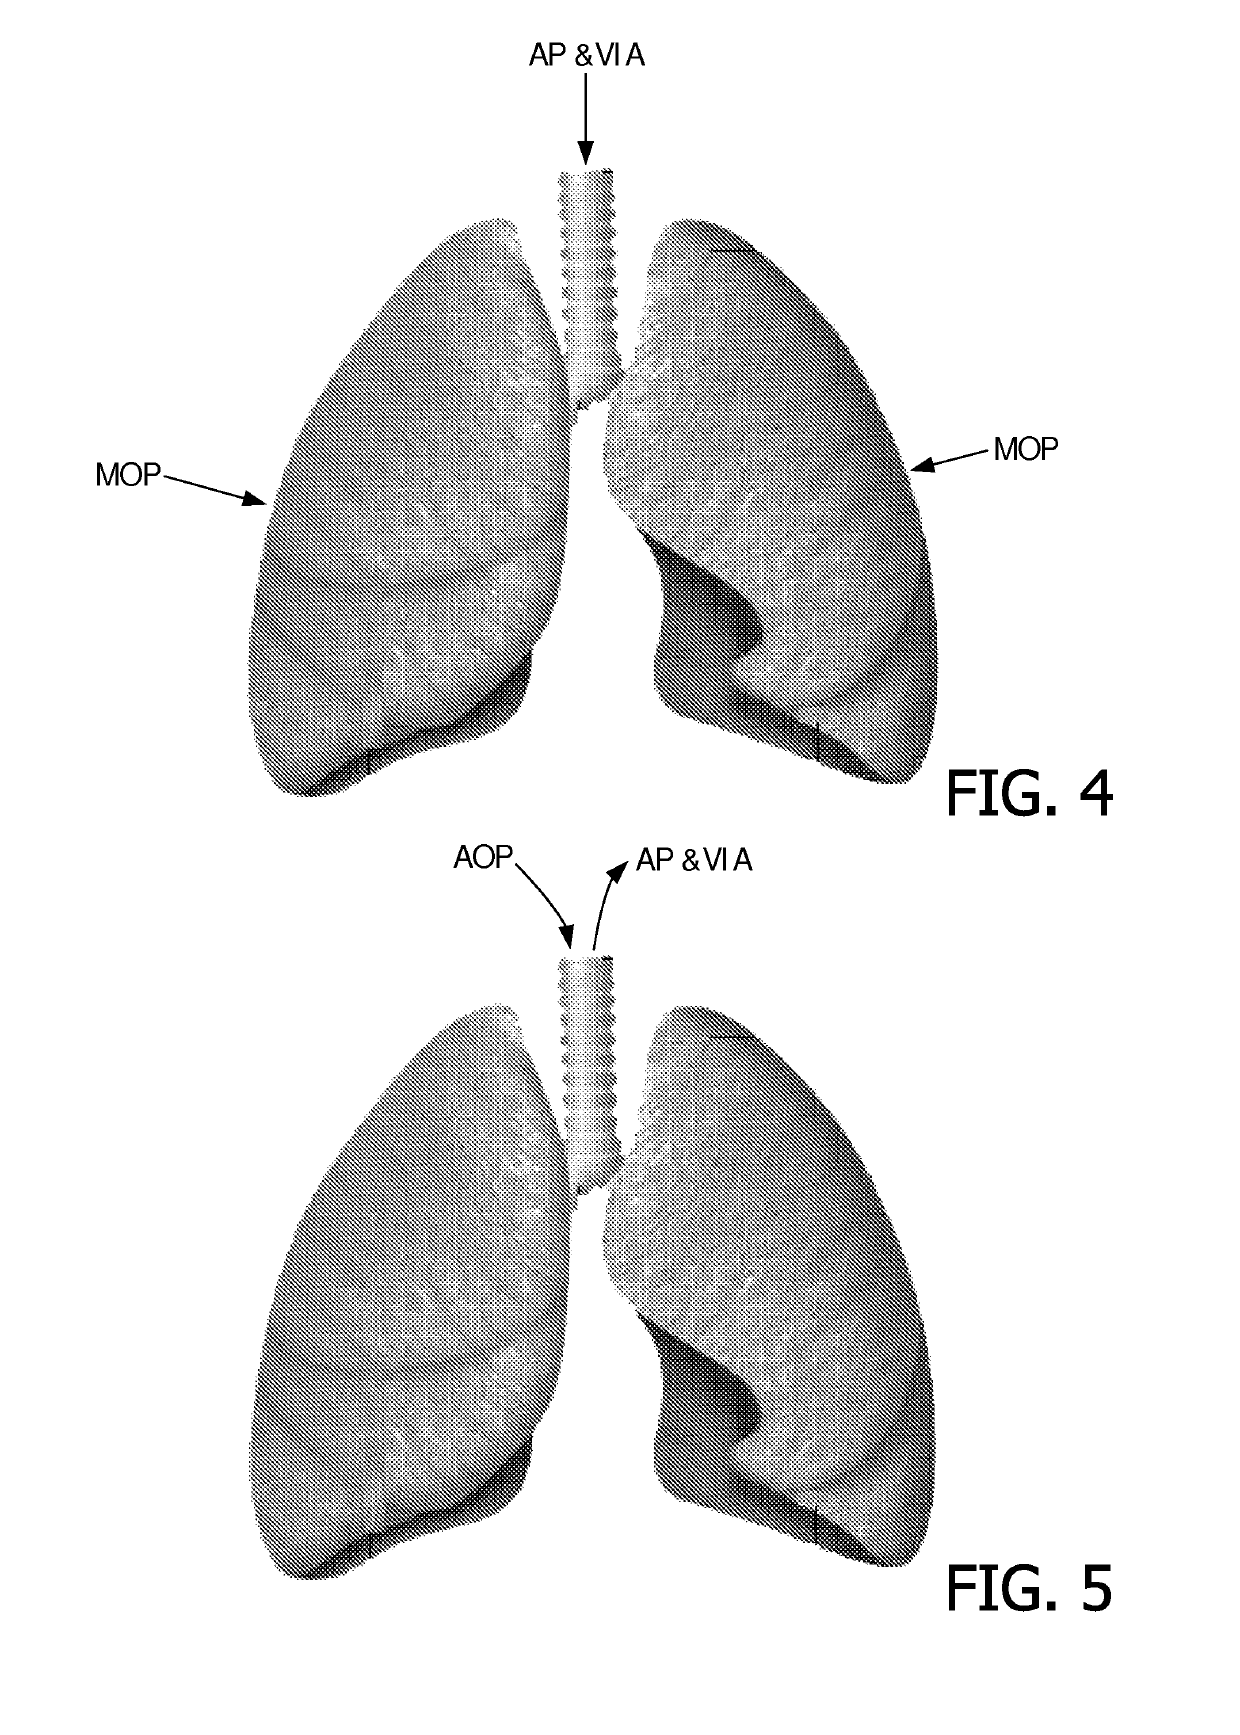 Device and method for assisting a cough